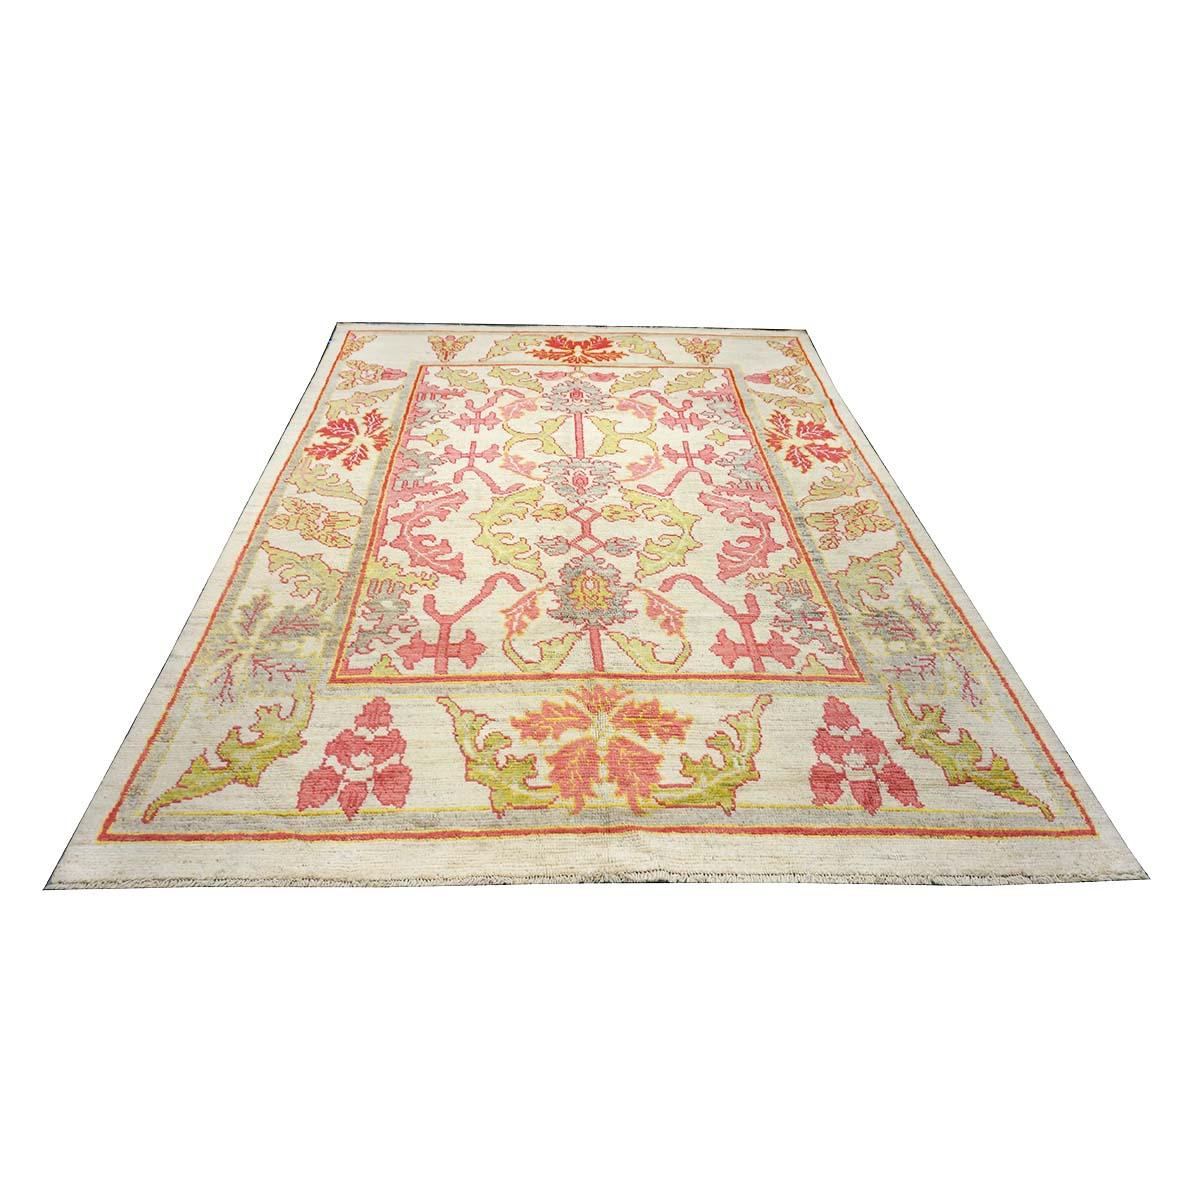  Ashly Fine Rugs presents a 21st-century Persian Oushak 8x11 handmade area rug. Oushaks began in a location just south of Istanbul, in a region that was to become the rugs namesake, Oushak. Although nomads first produced the rugs for personal use